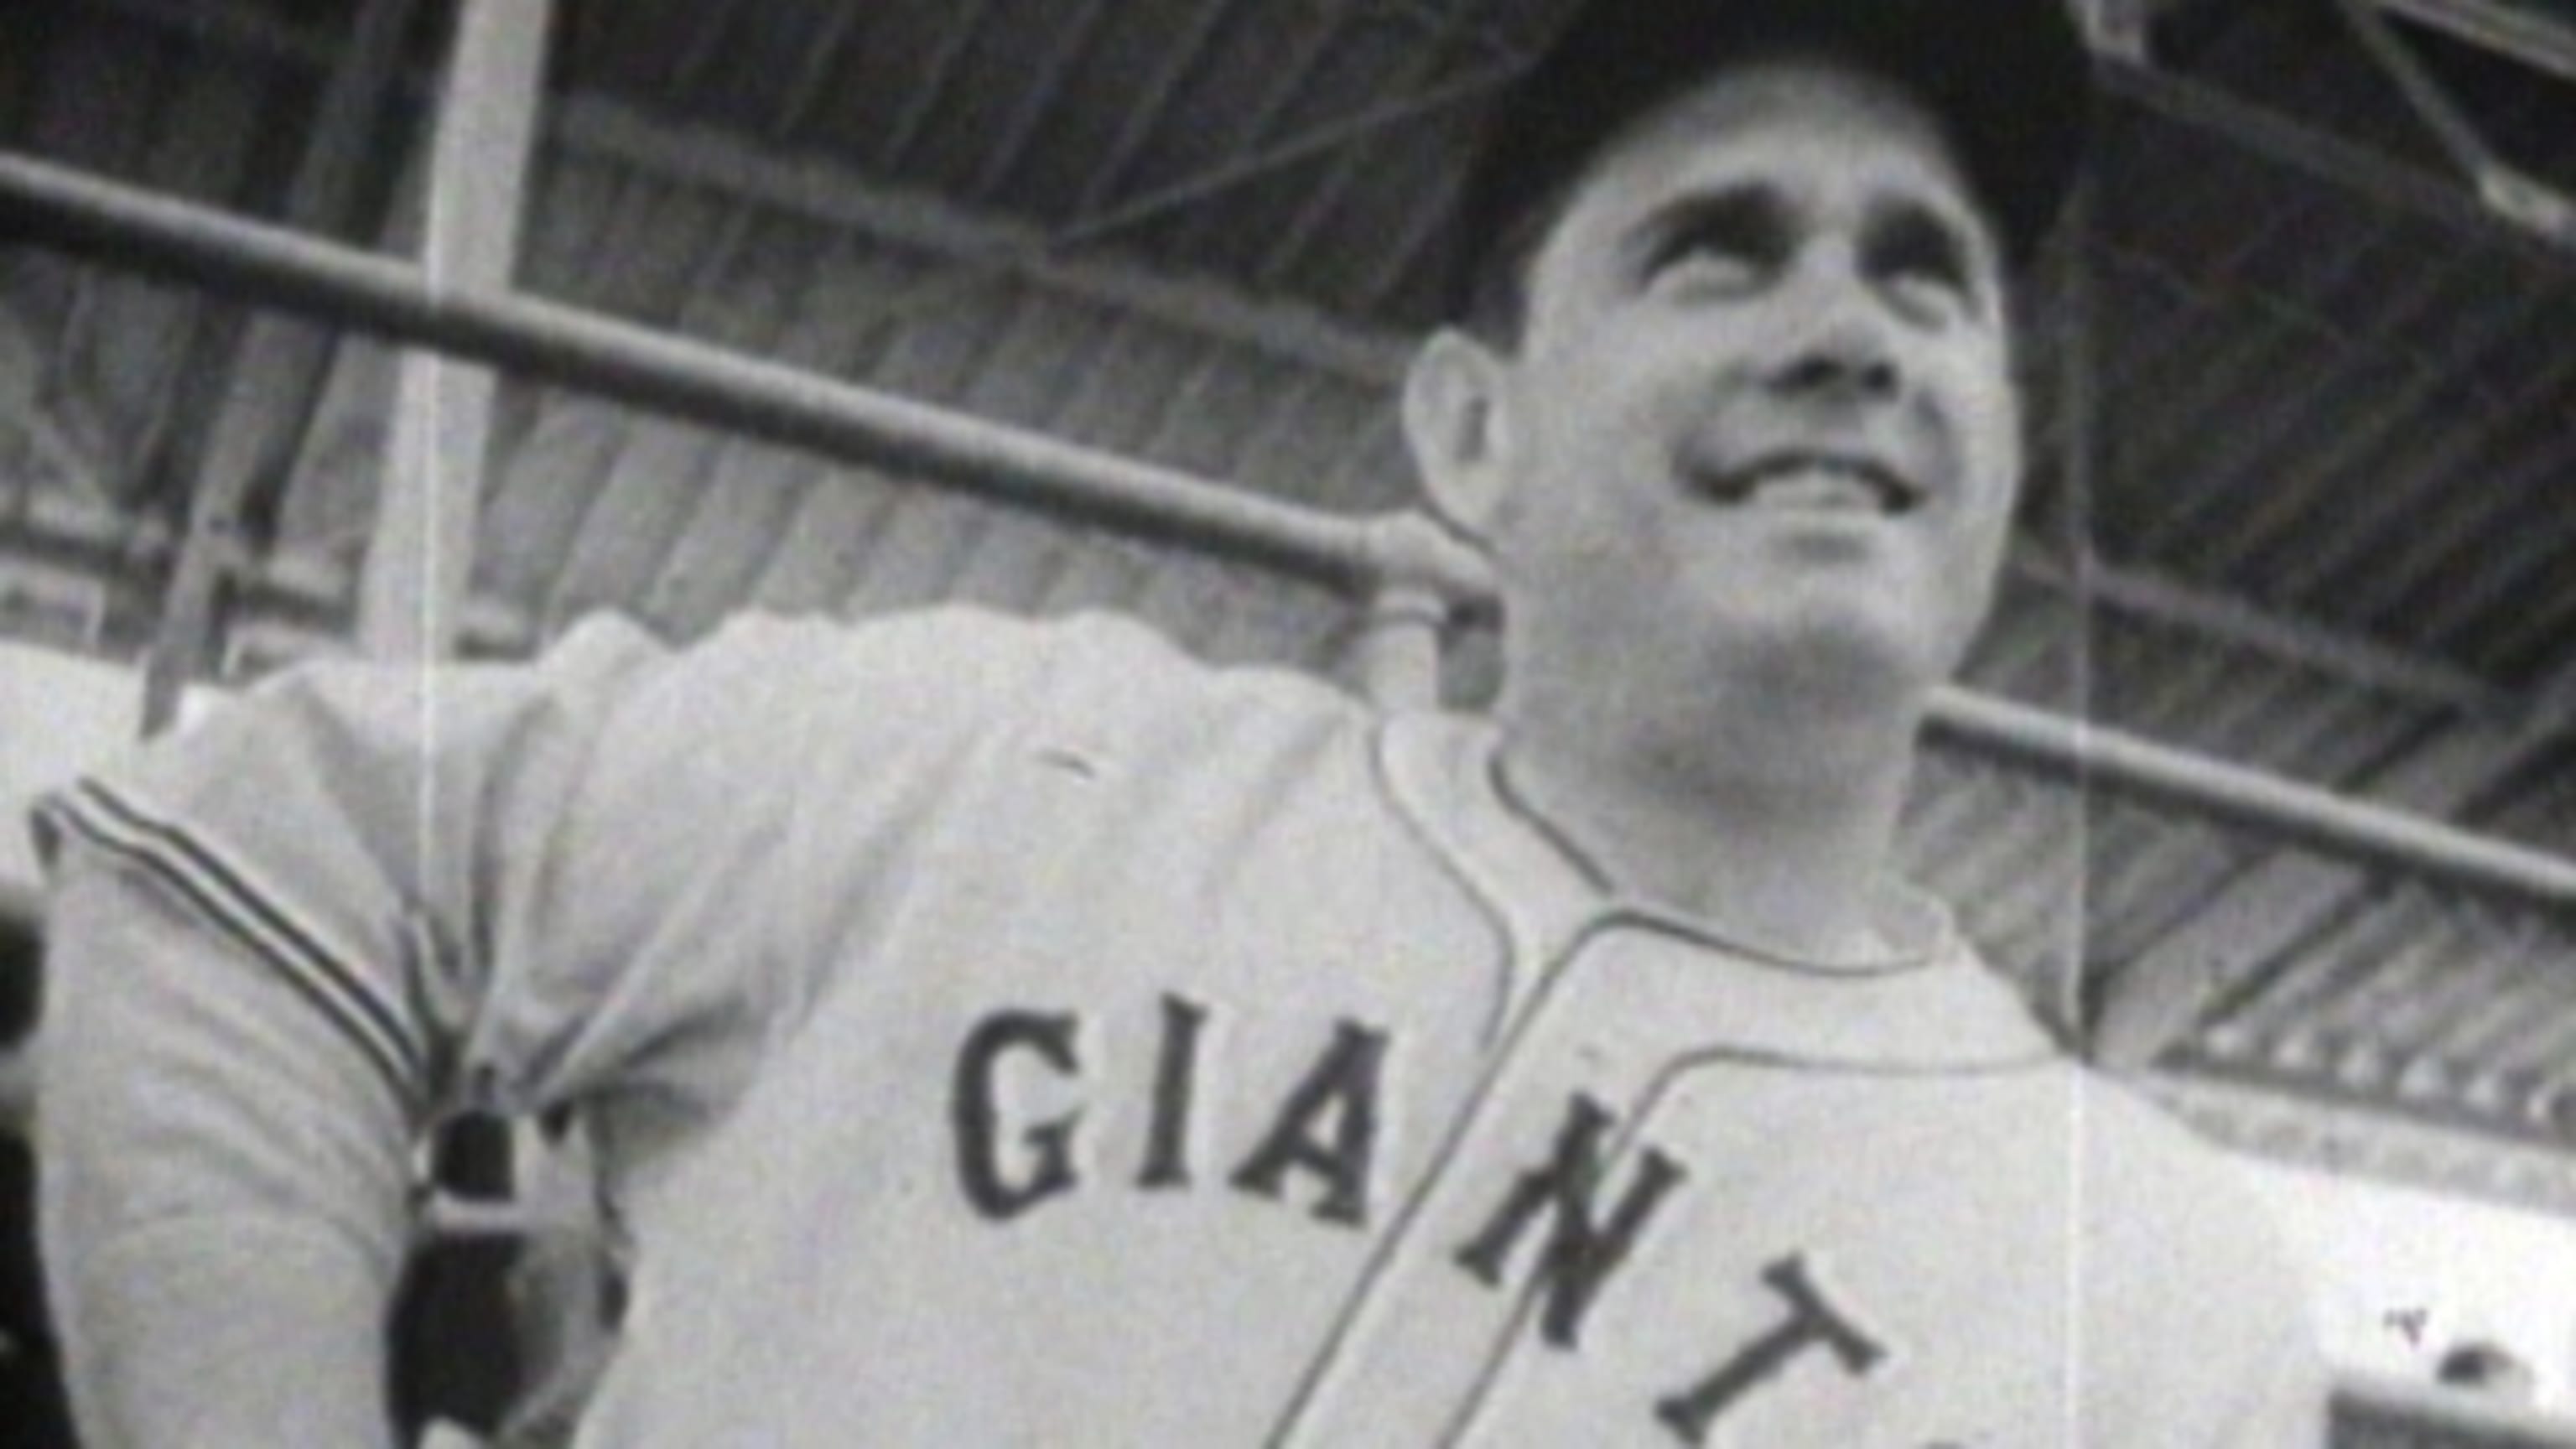 History of Giants' retired jersey numbers